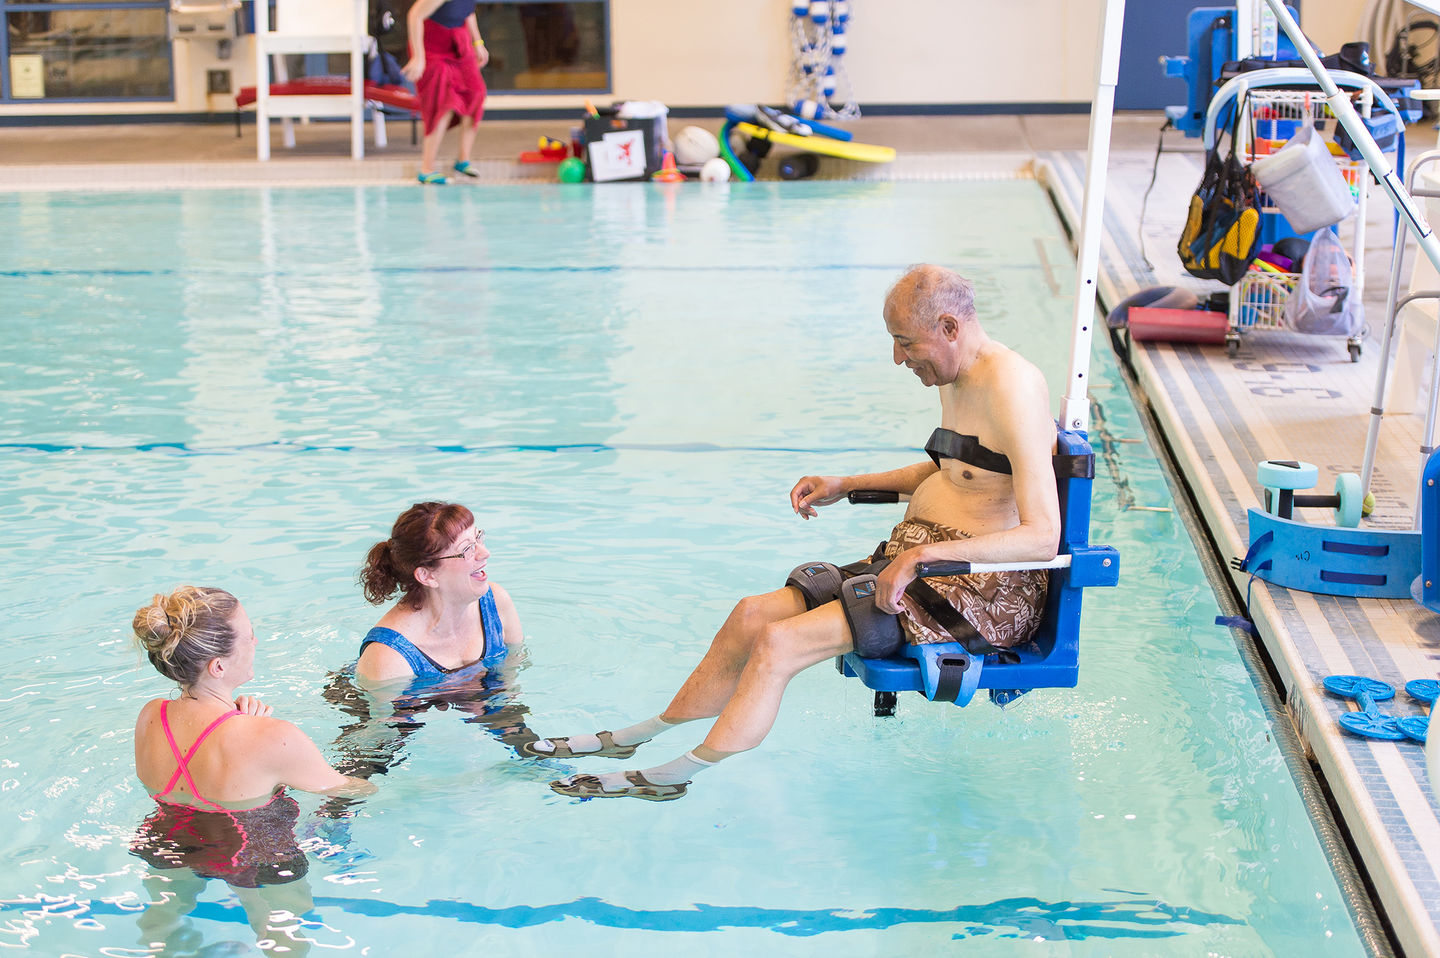 image of three people using a pool. Two women are in the pool, and one man is entering the pool using a pool lift.